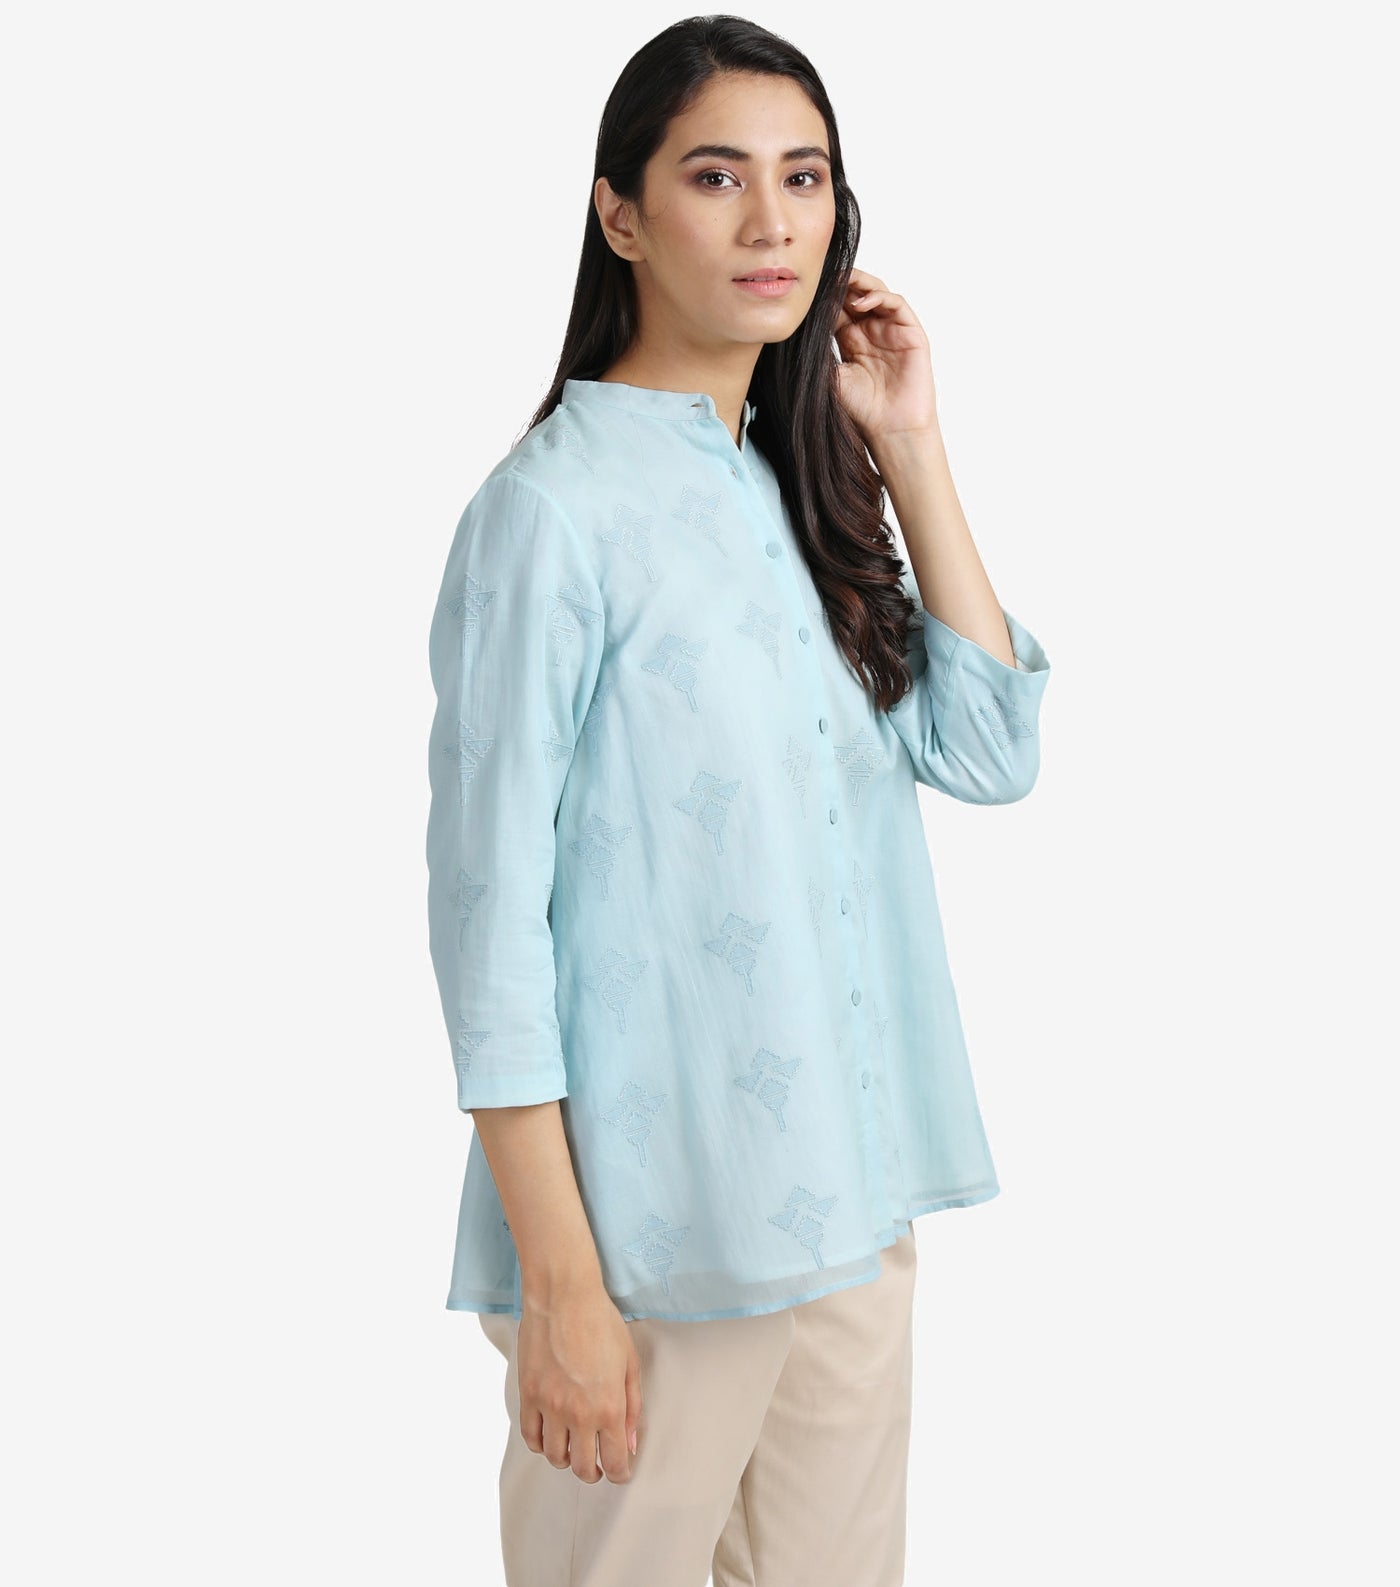 Skyblue embroidered cotton shirt